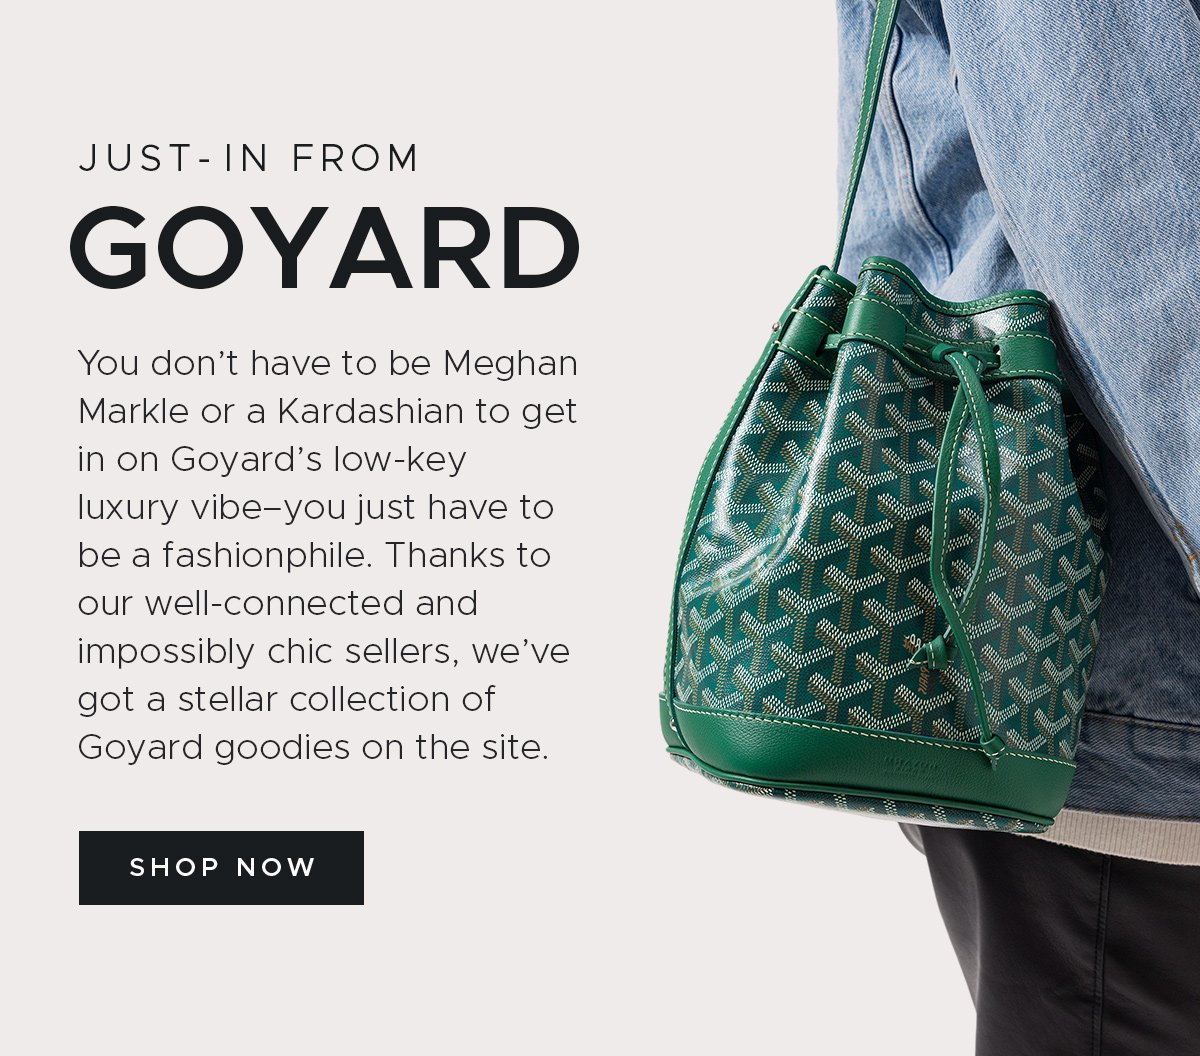 Just in from Goyard! - Fashionphile